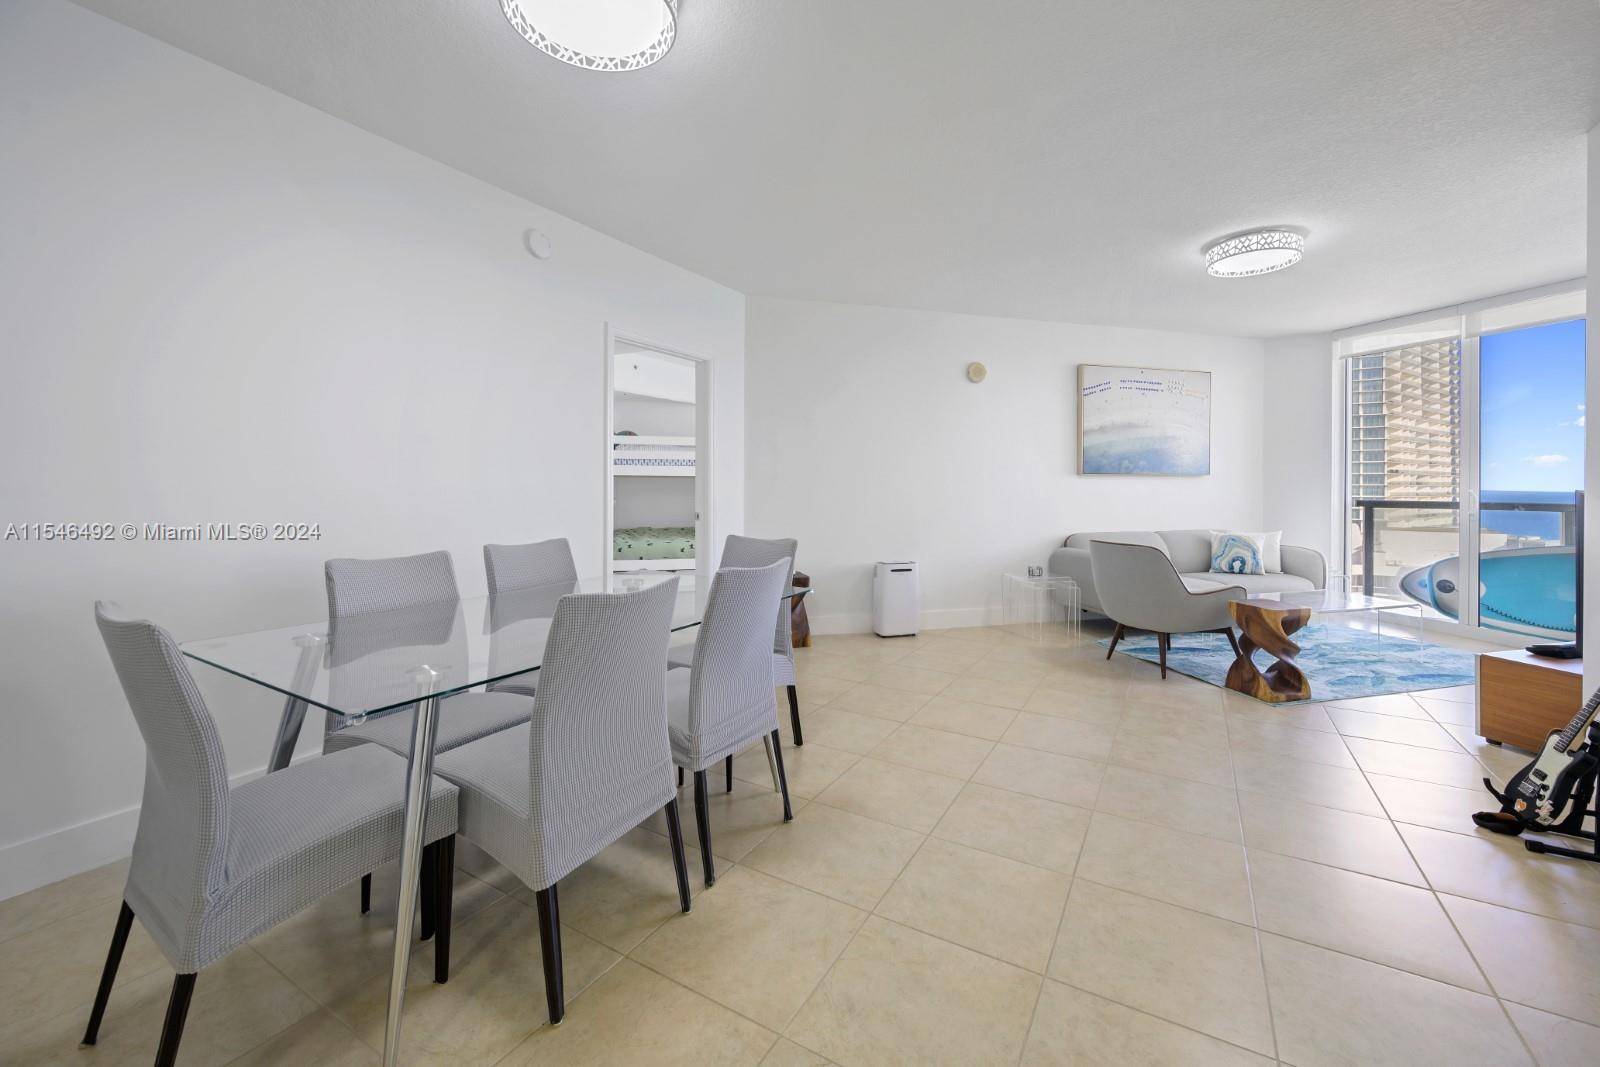 Turnkey unit located in the heart of Sunny Isles, enjoy resort style living in a large 2 bedroom DEN, 2.